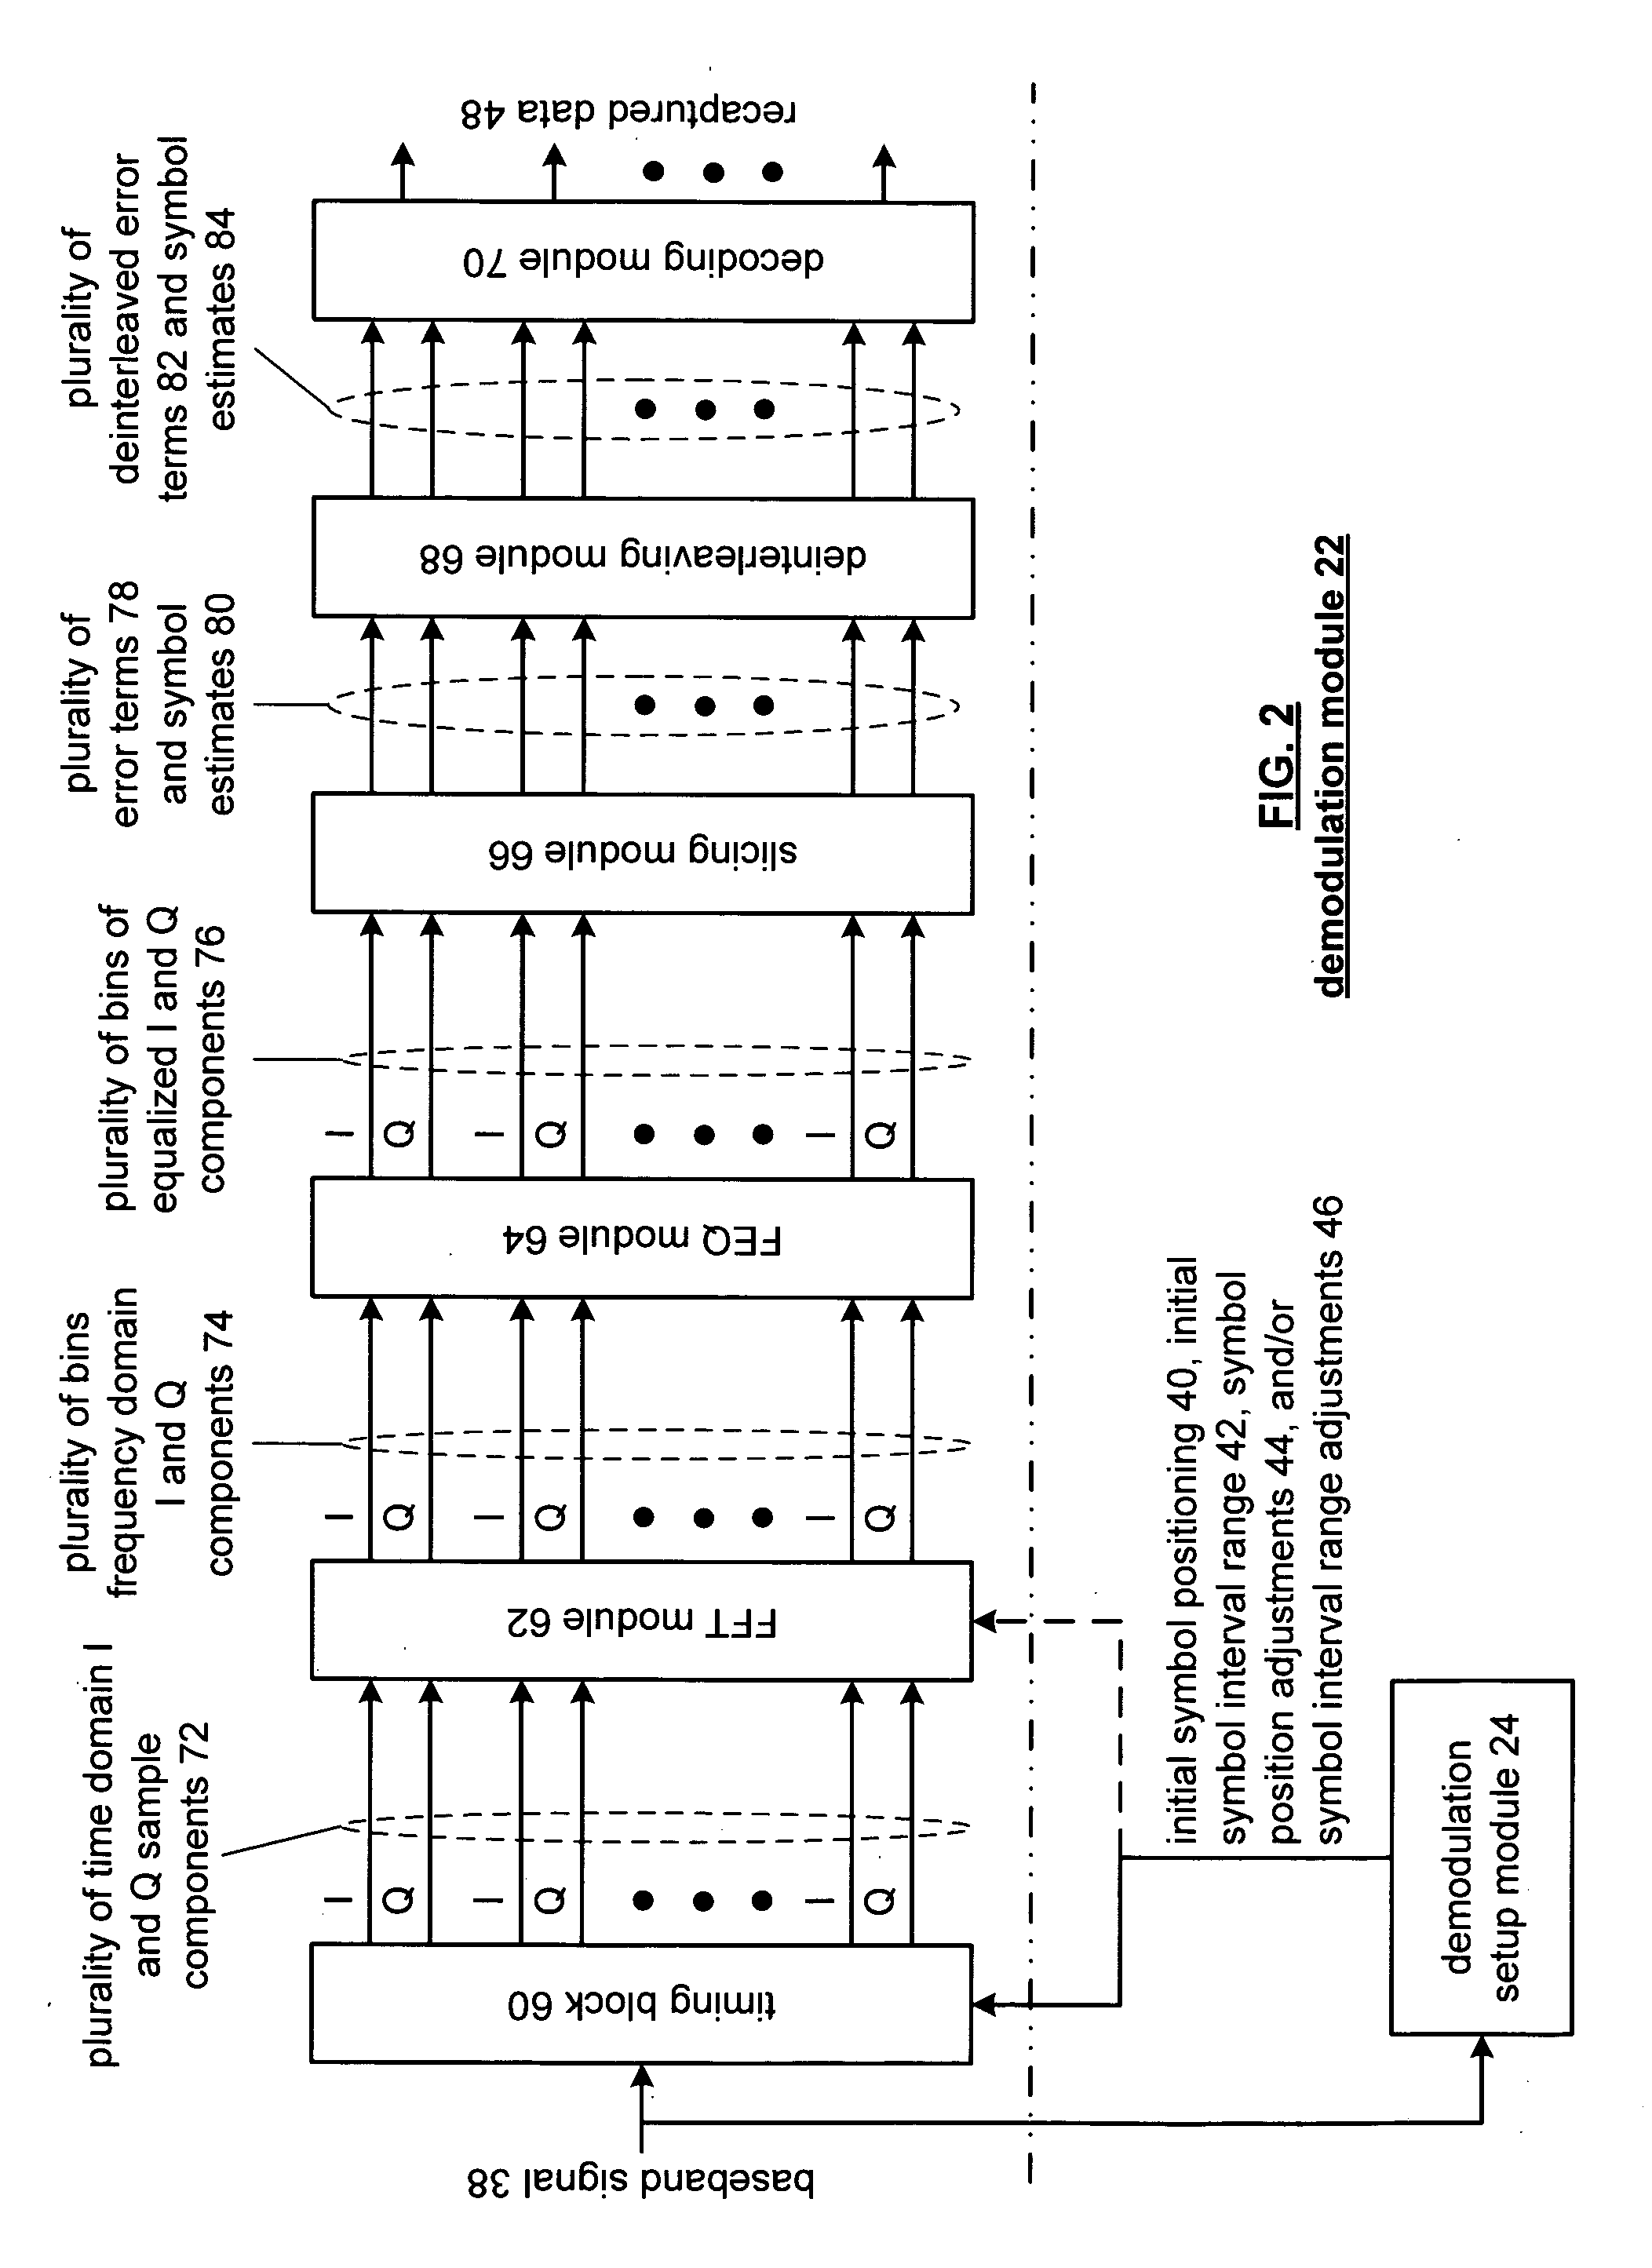 Method and apparatus for adjusting symbol timing and/or symbol positioning of a receive burst of data within a radio receiver